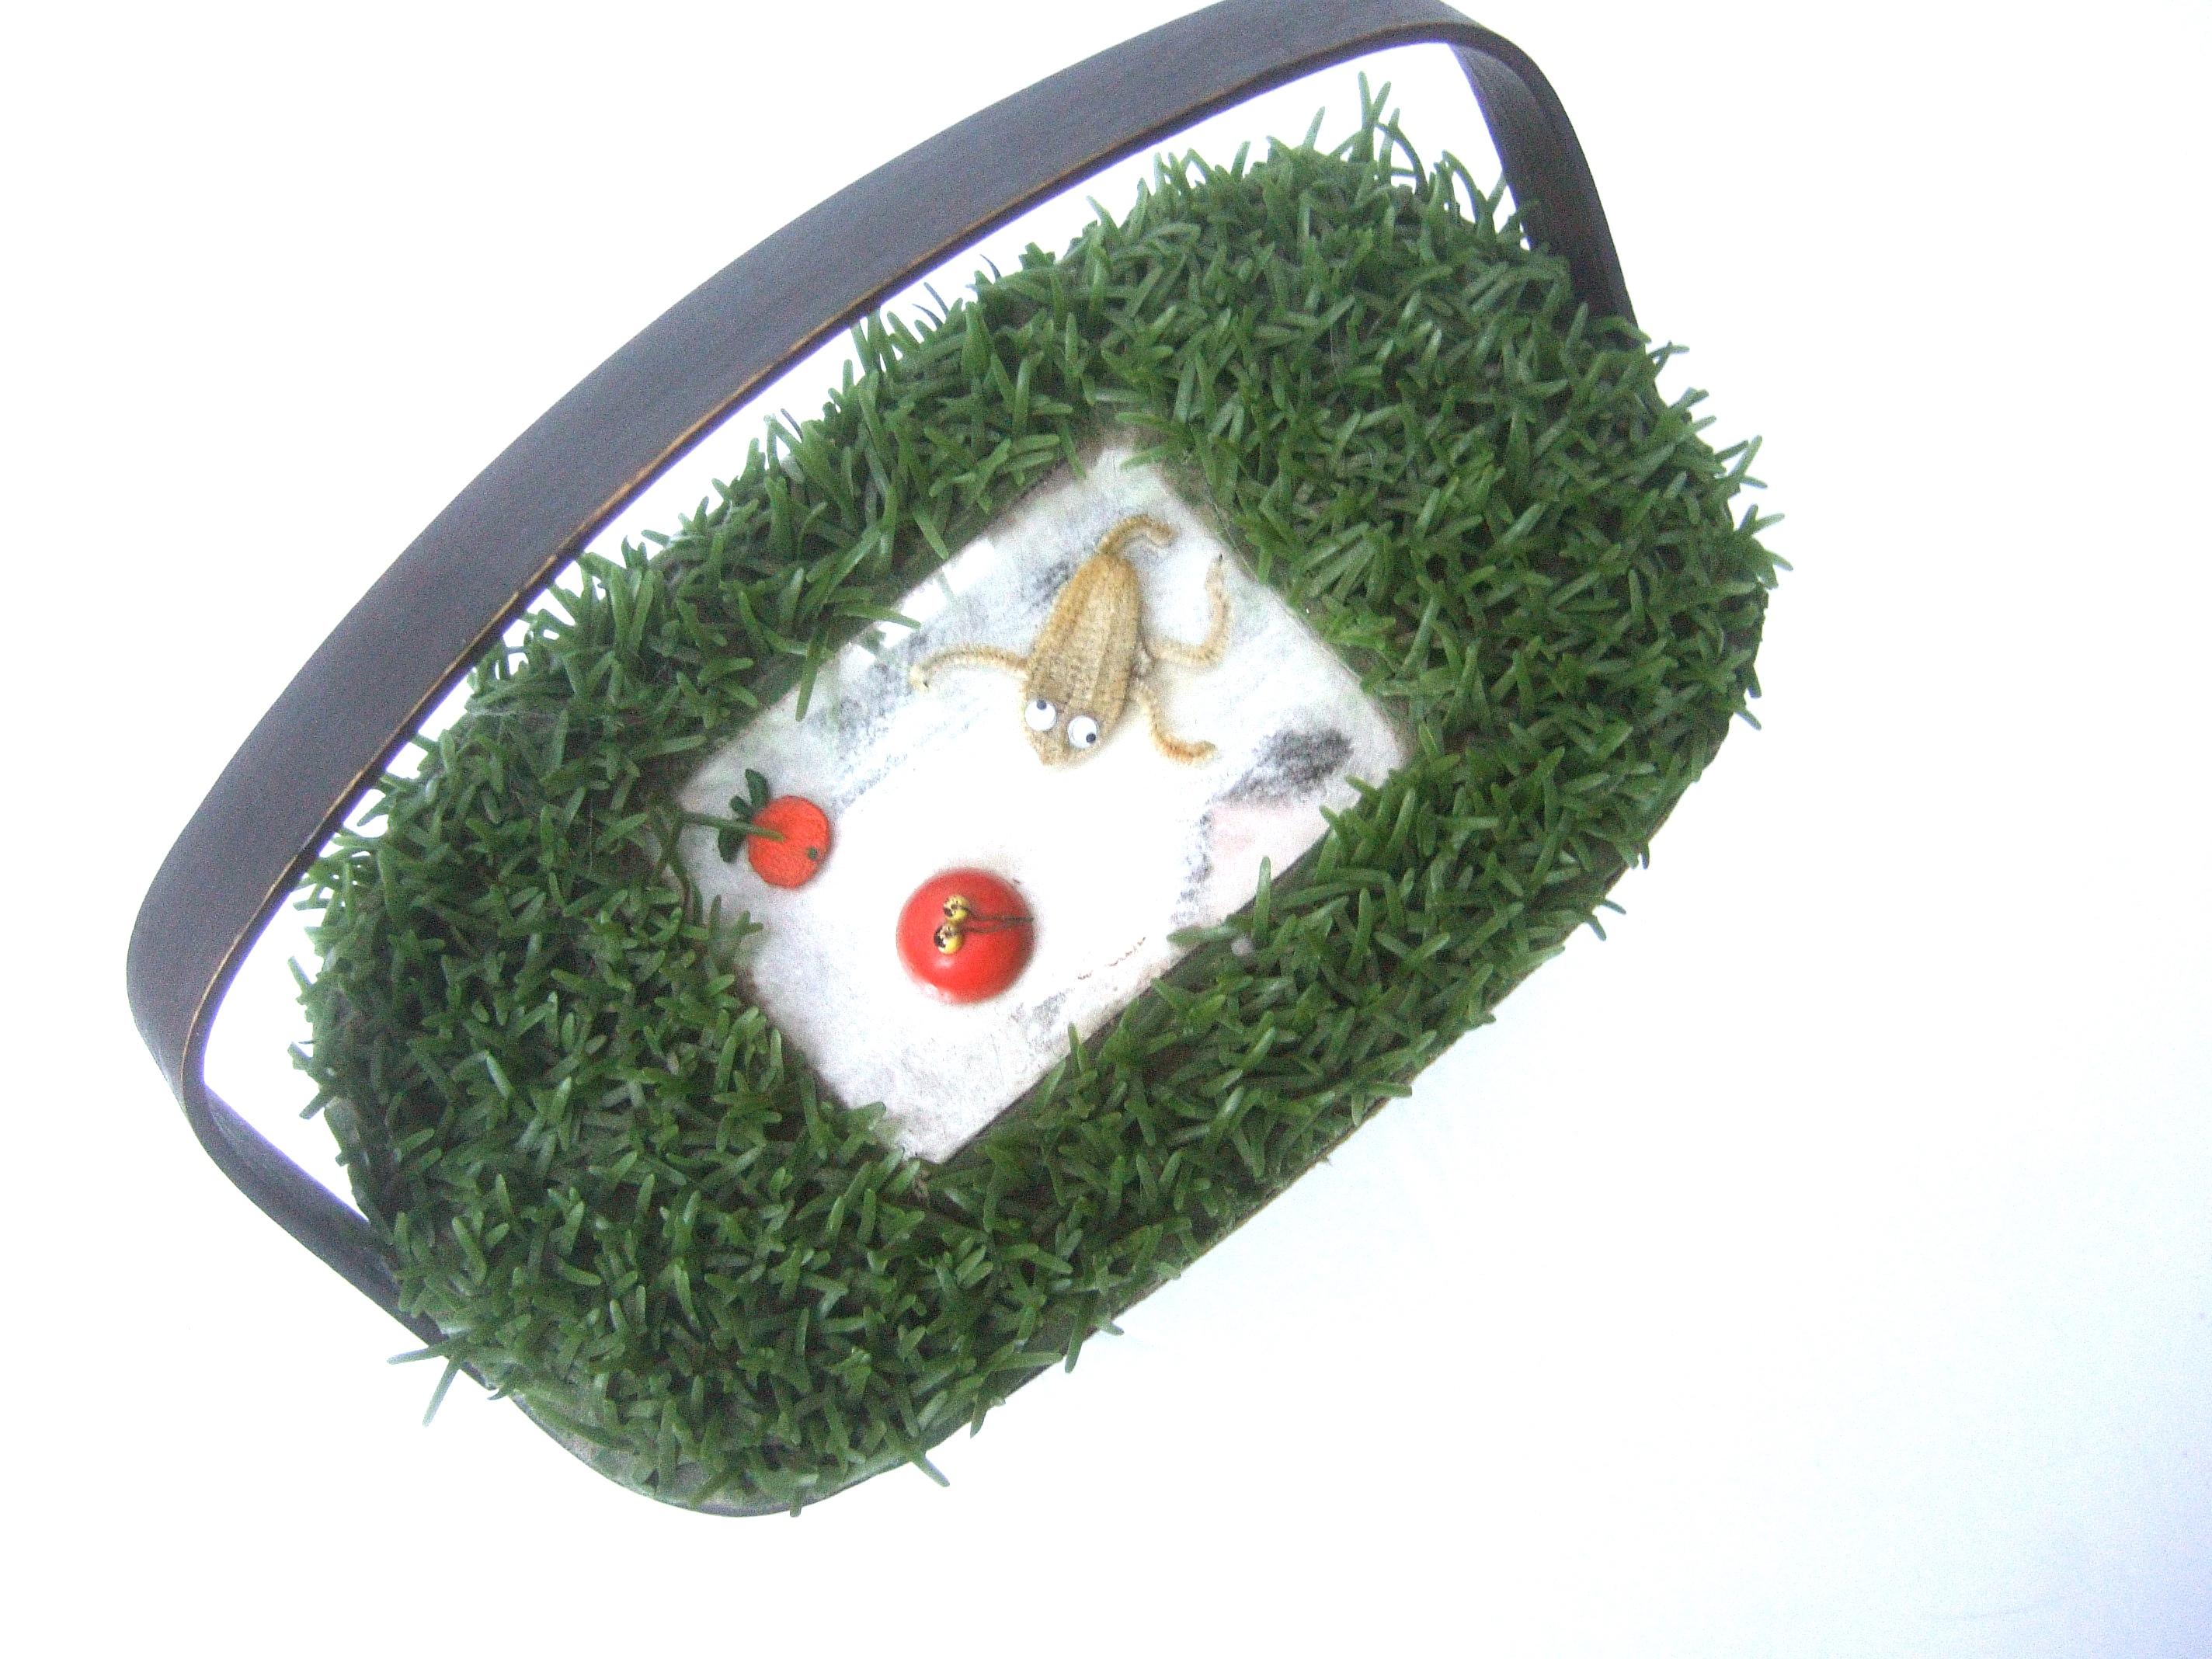 Women's Whimsical Quirky Astro Turf  Wicker Handmade Basket Purse circa 1970 For Sale